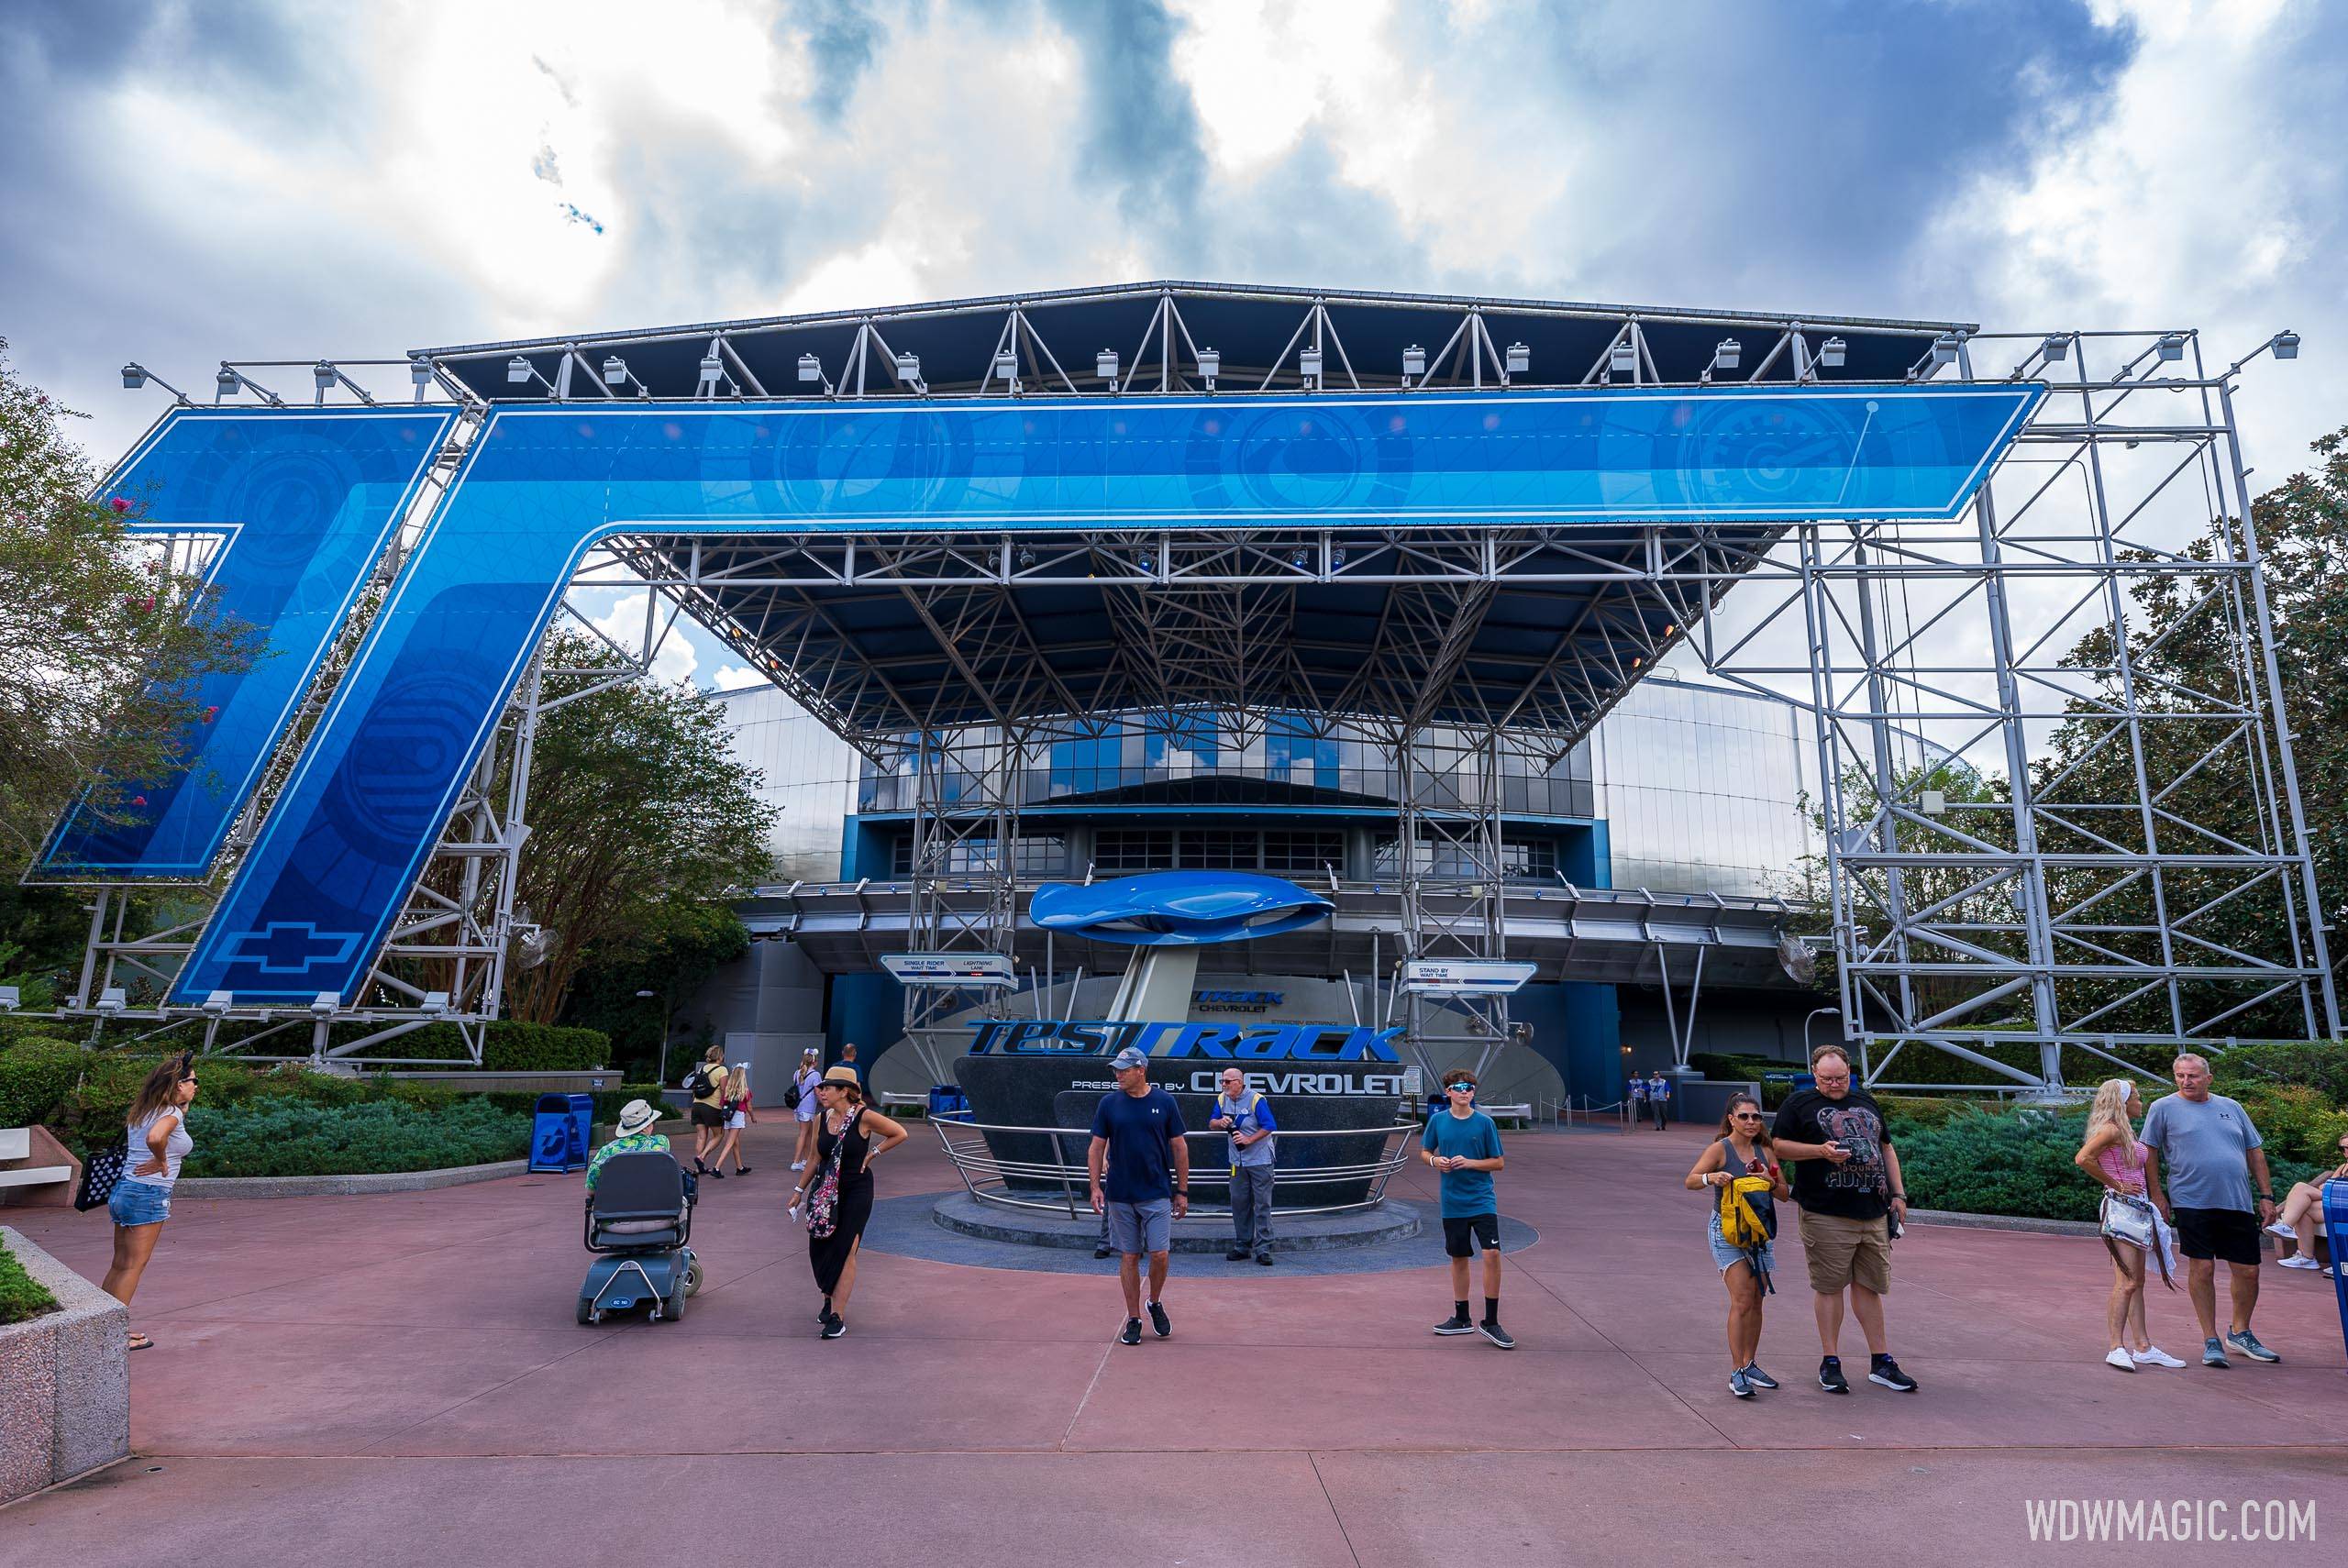 EPCOT's Test Track experiences a second day of downtime